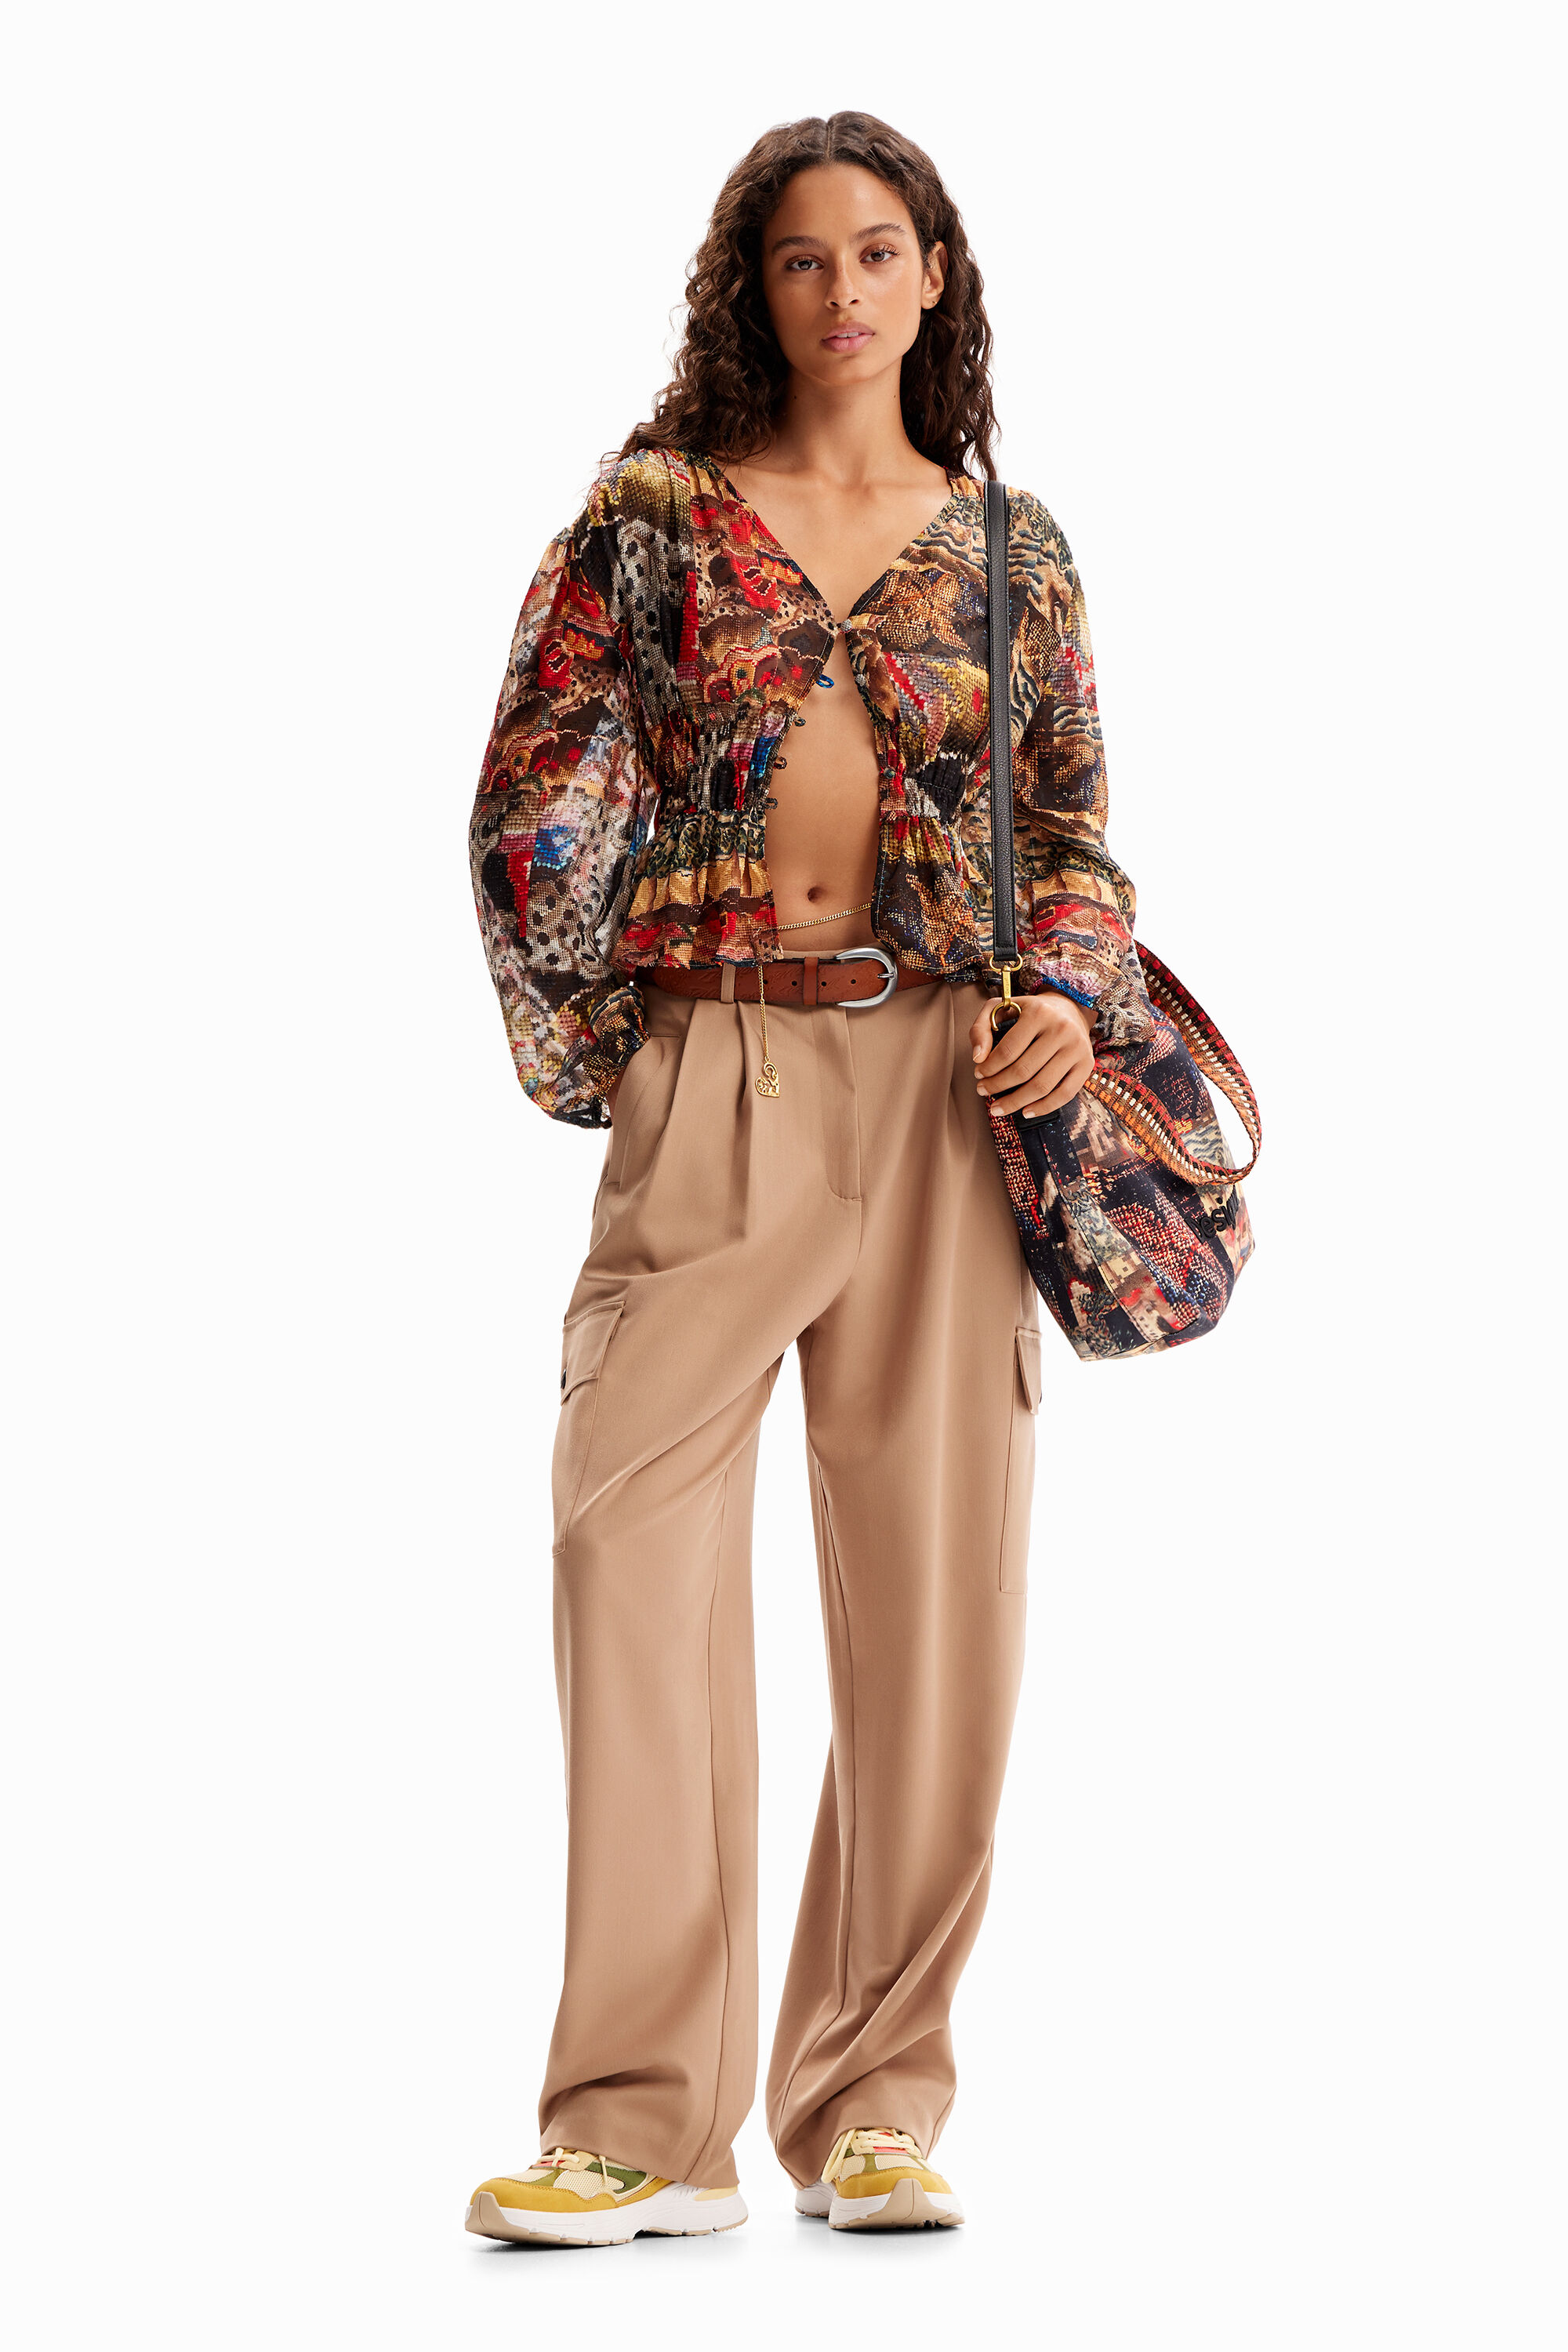 Tapestry Bluse M. Christian Lacroix BROWN S  - Onlineshop Desigual